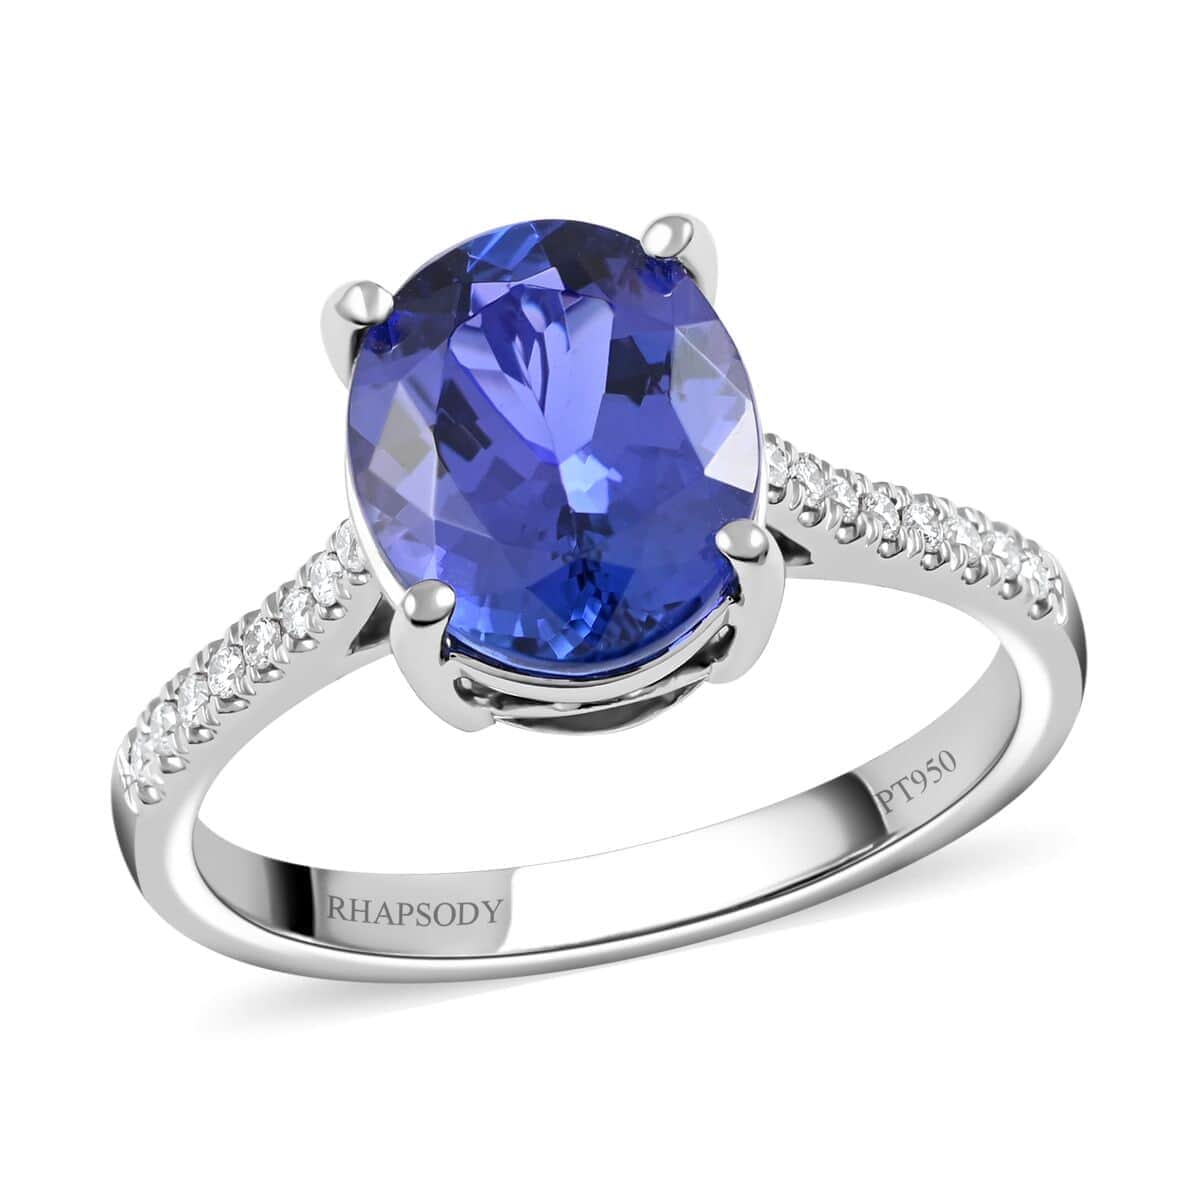 Rhapsody Certified and Appraised AAAA Tanzanite Ring, E-F VS Diamond Accent Ring, 950 Platinum Ring, Gifts For Her 6.60 Grams 4.10 ctw image number 0